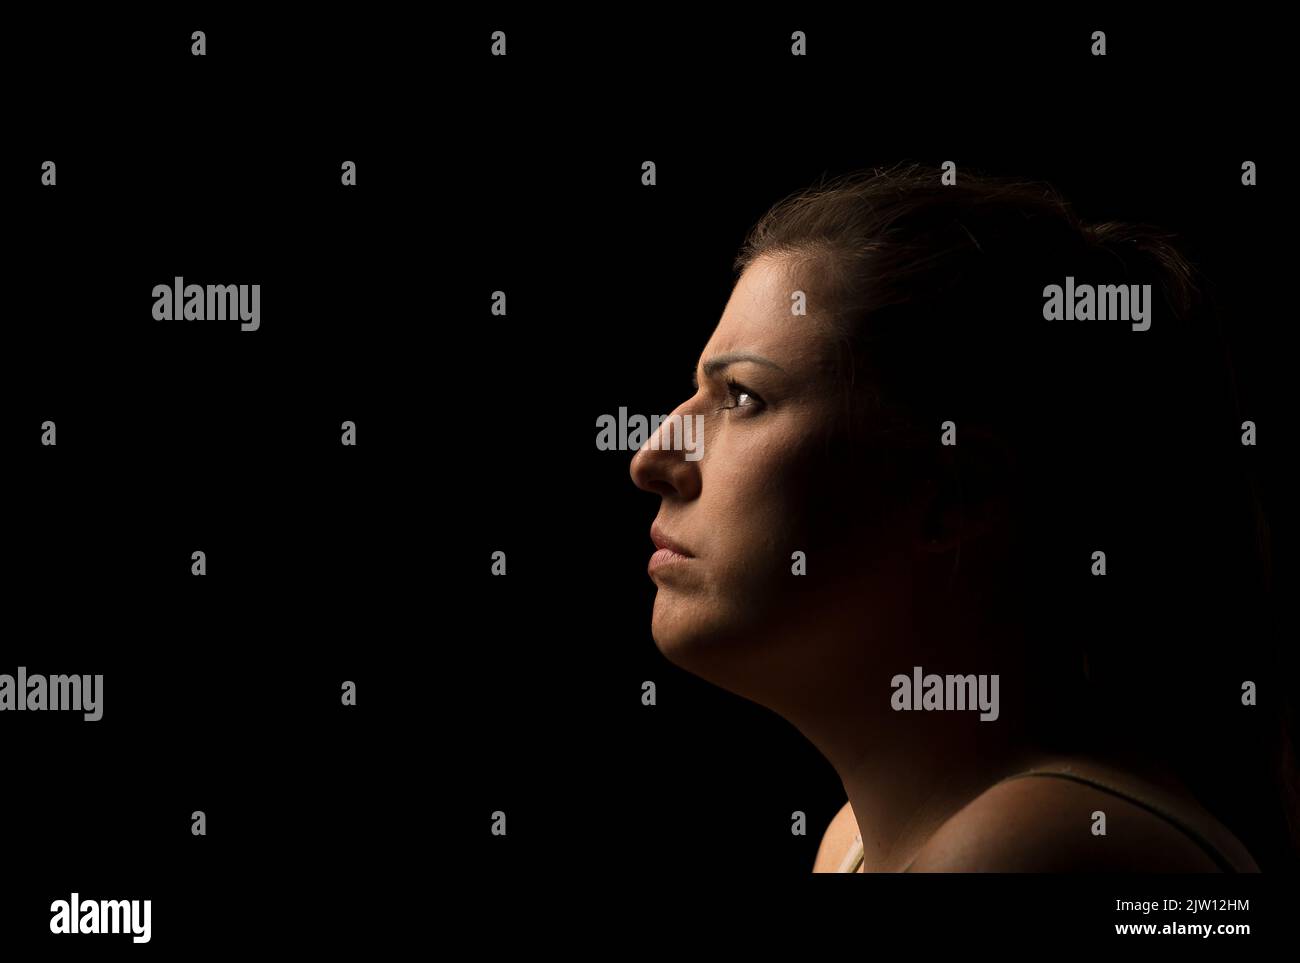 Side shot of a Caucasian female head giving a stern look. Stock Photo